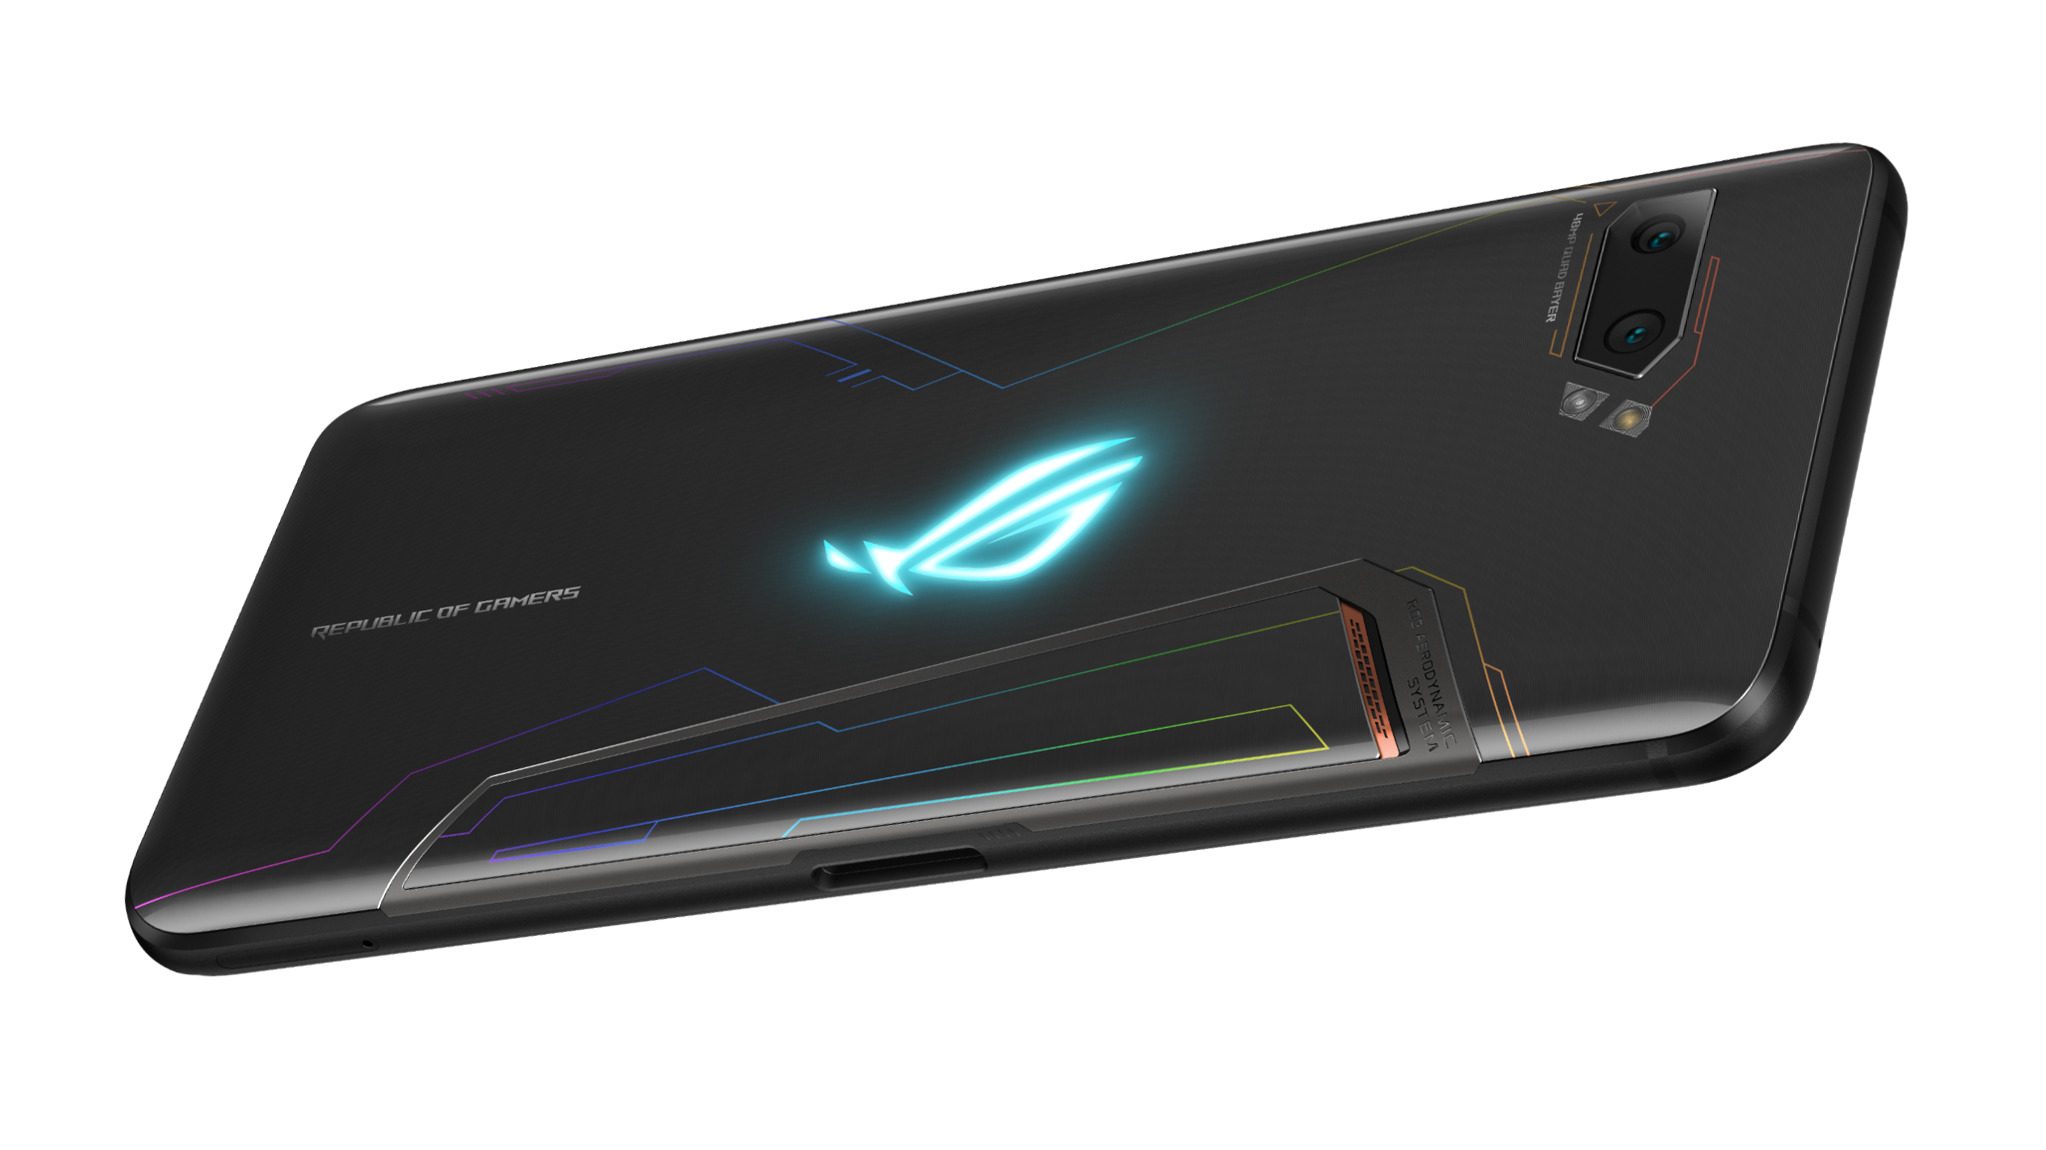 ASUS ROG Phone II: Specs, features, price in the Philippines